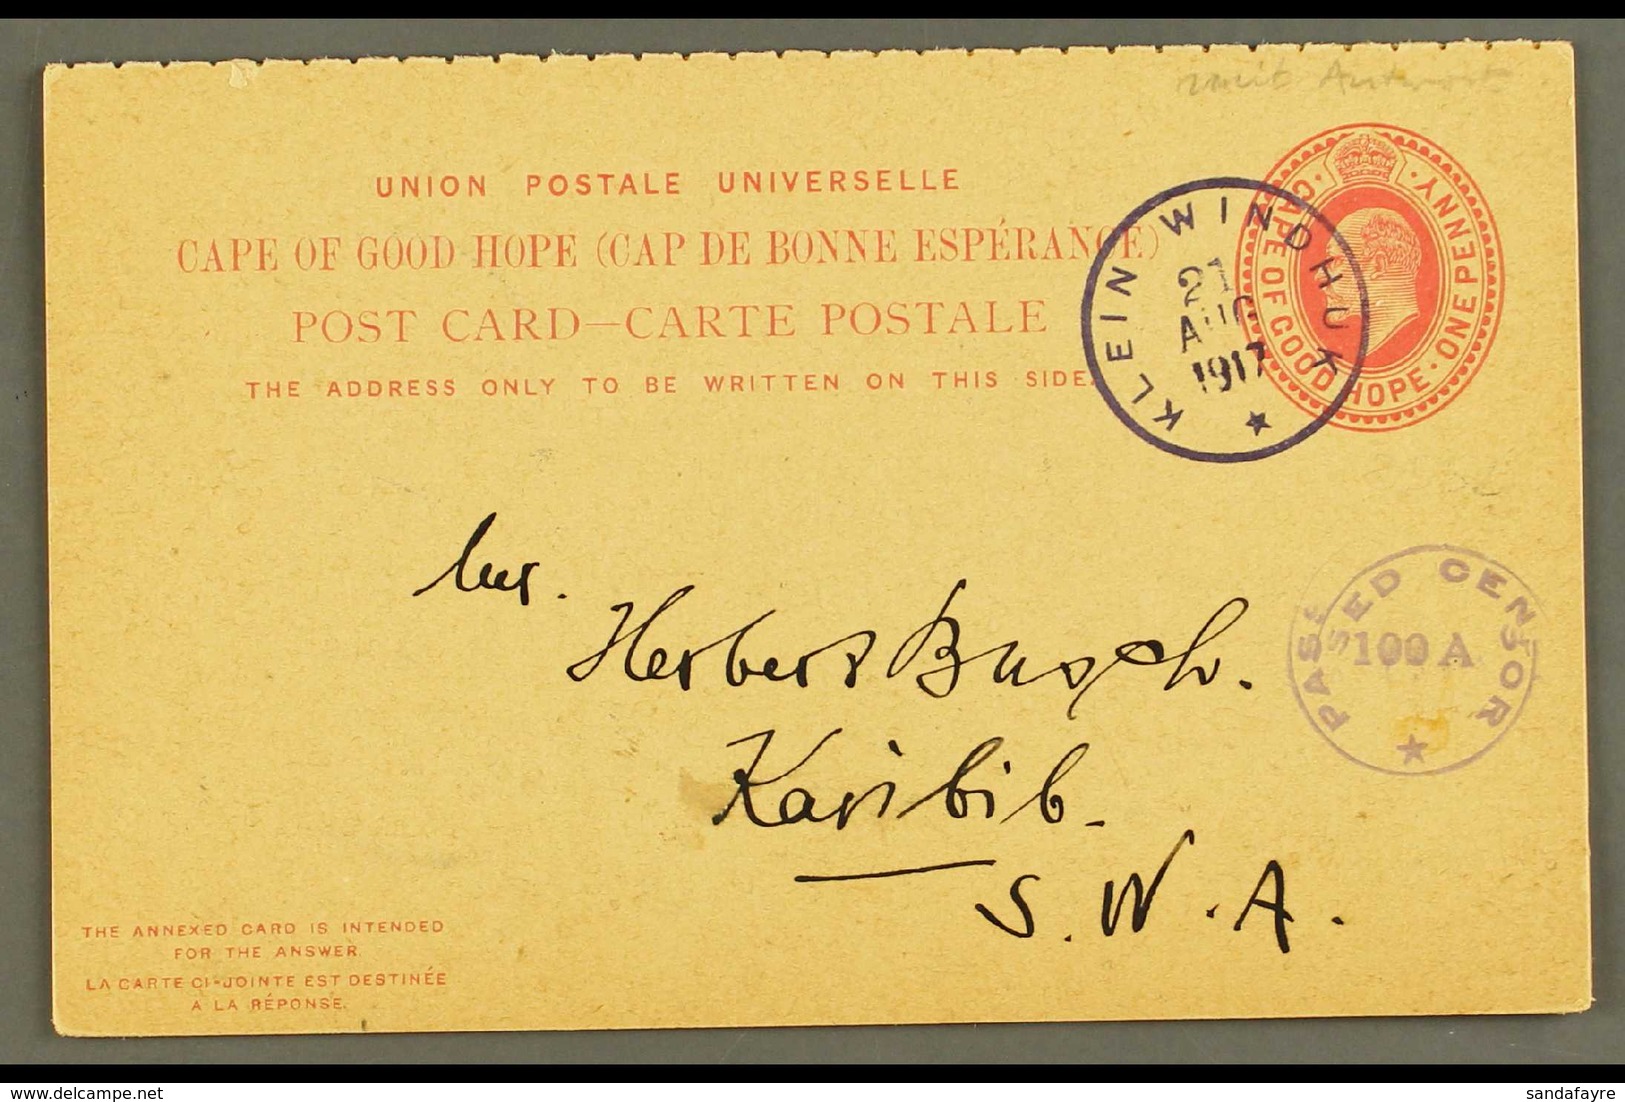 1917 (21 Aug) 1d + 1d KEVII Cape Complete Reply Card To Karibib Cancelled By Superb "KLEIN WINDHUK" Rubber Cds Pmk In Da - Afrique Du Sud-Ouest (1923-1990)